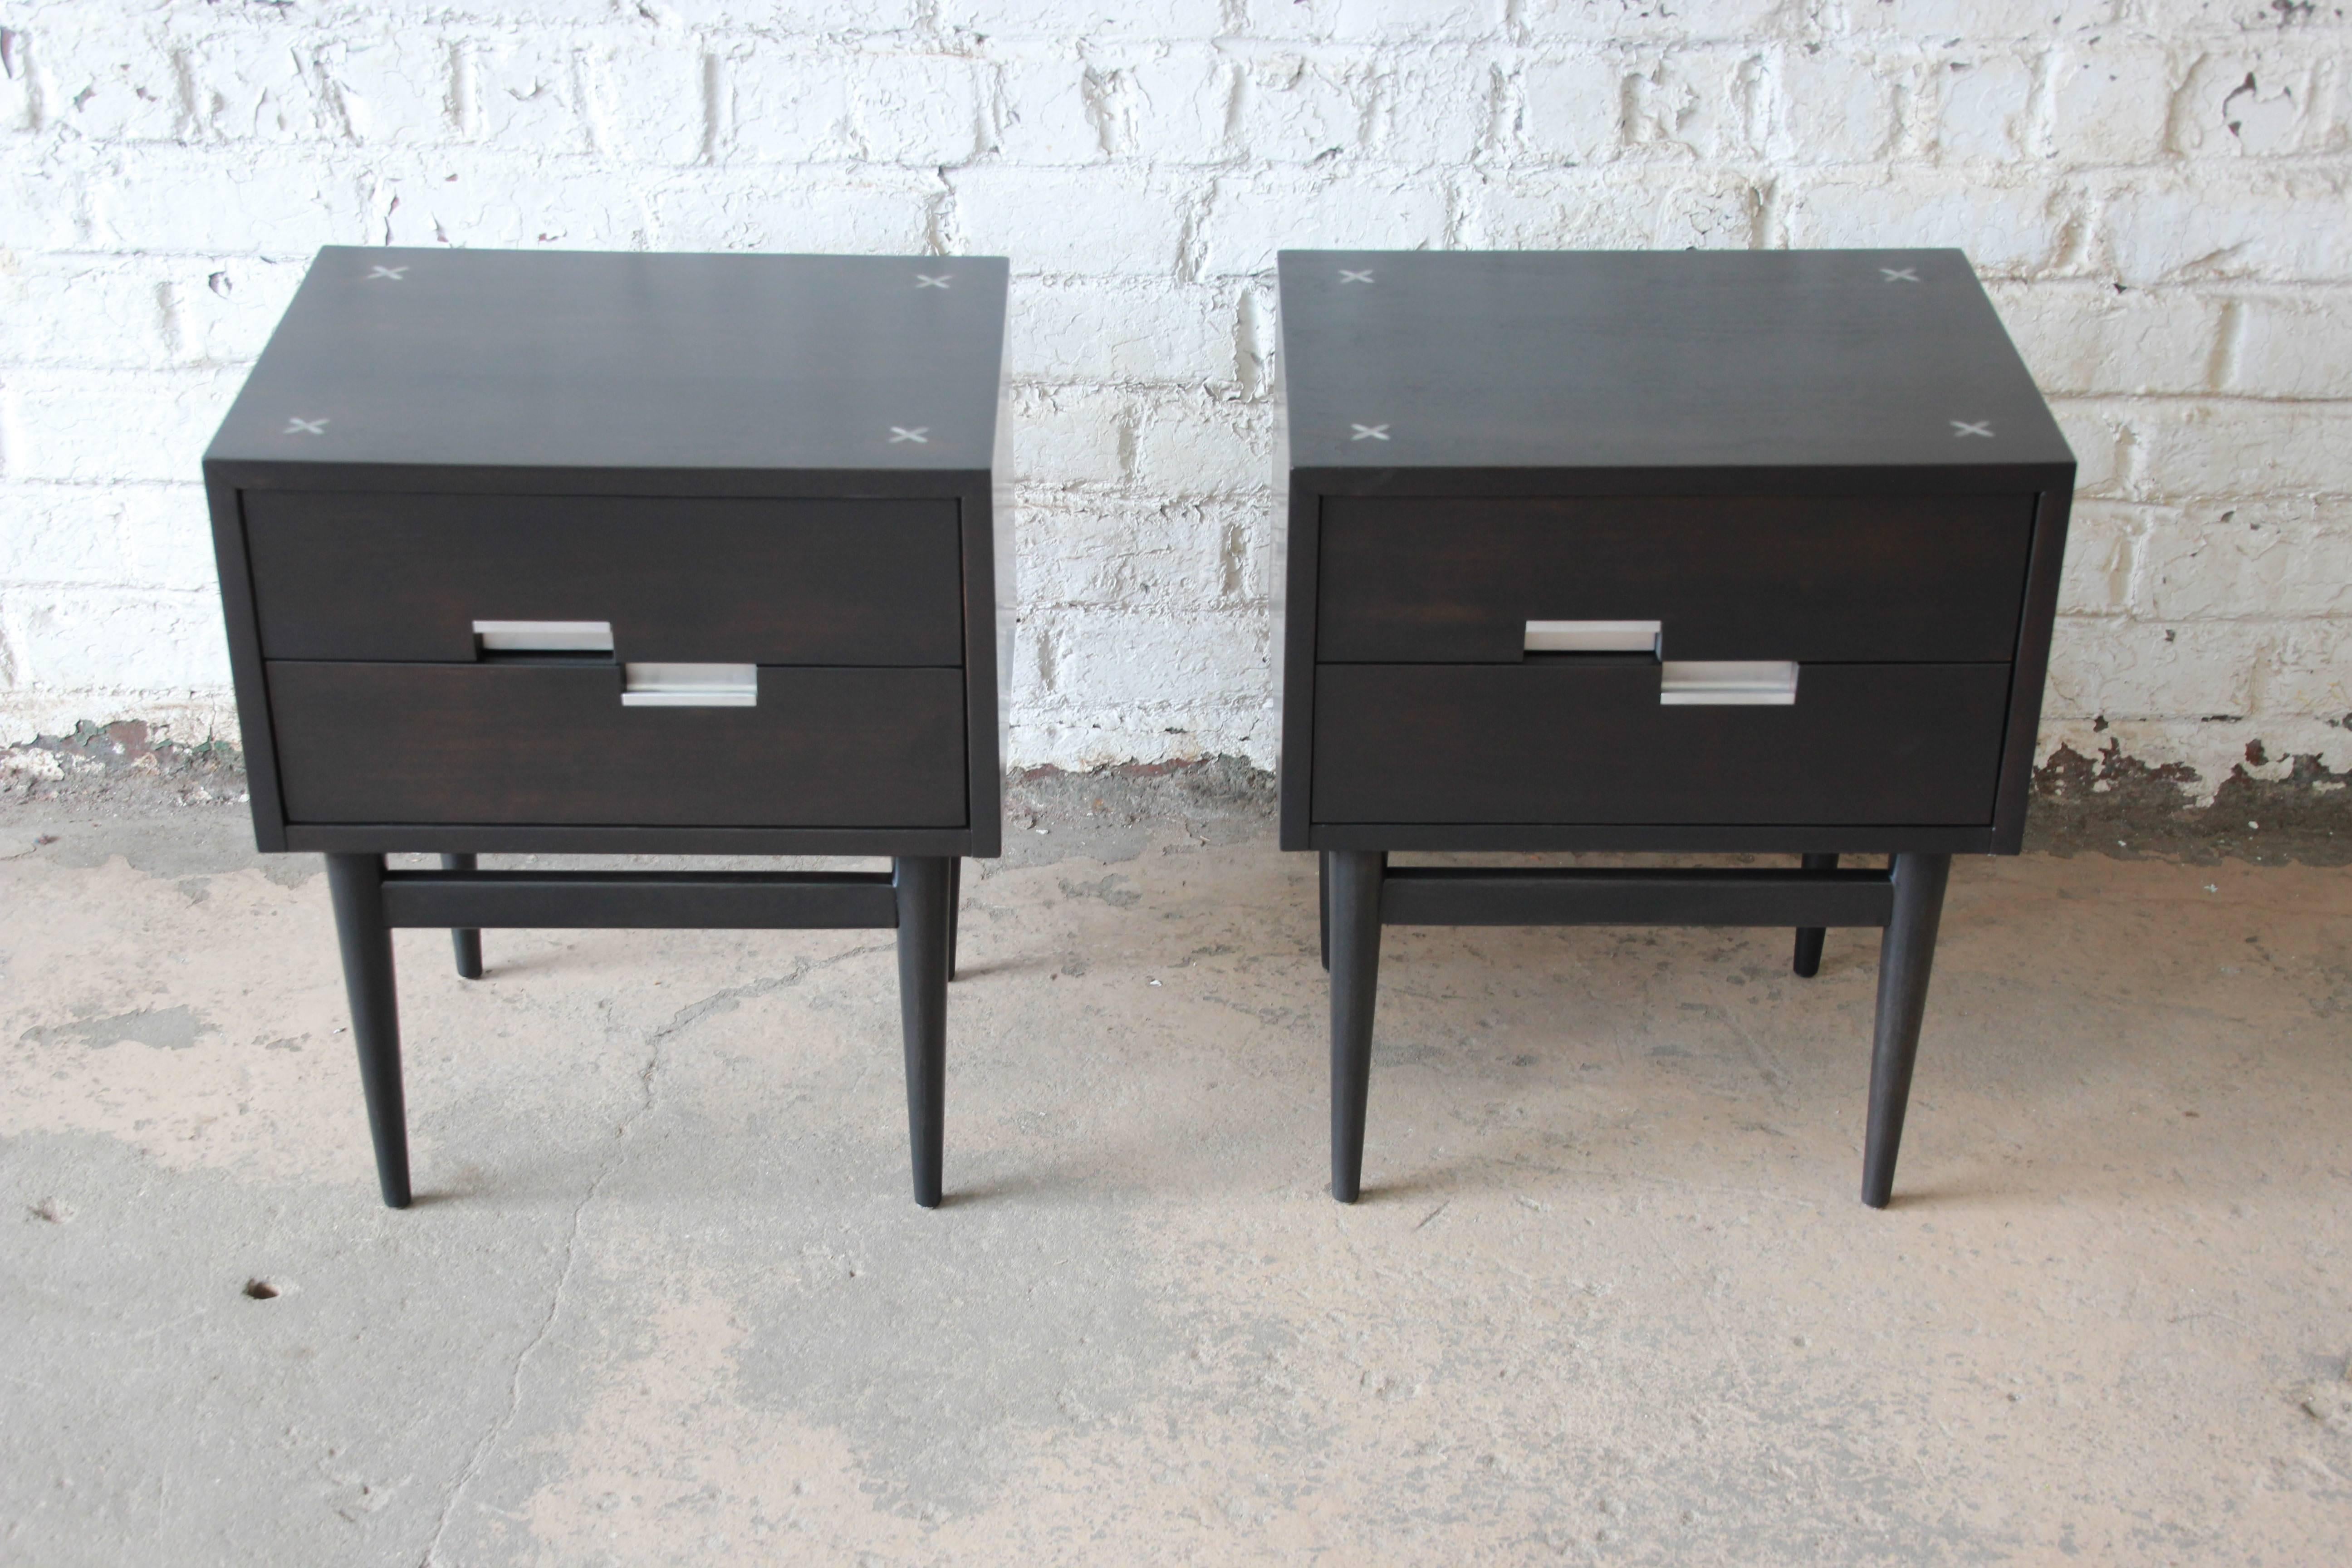 An exceptional pair of Mid-Century Modern ebonized nightstands designed by Merton Gershun for American of Martinsville, circa 1960s. The nightstands feature Gershun's iconic aluminum drawer pulls and 